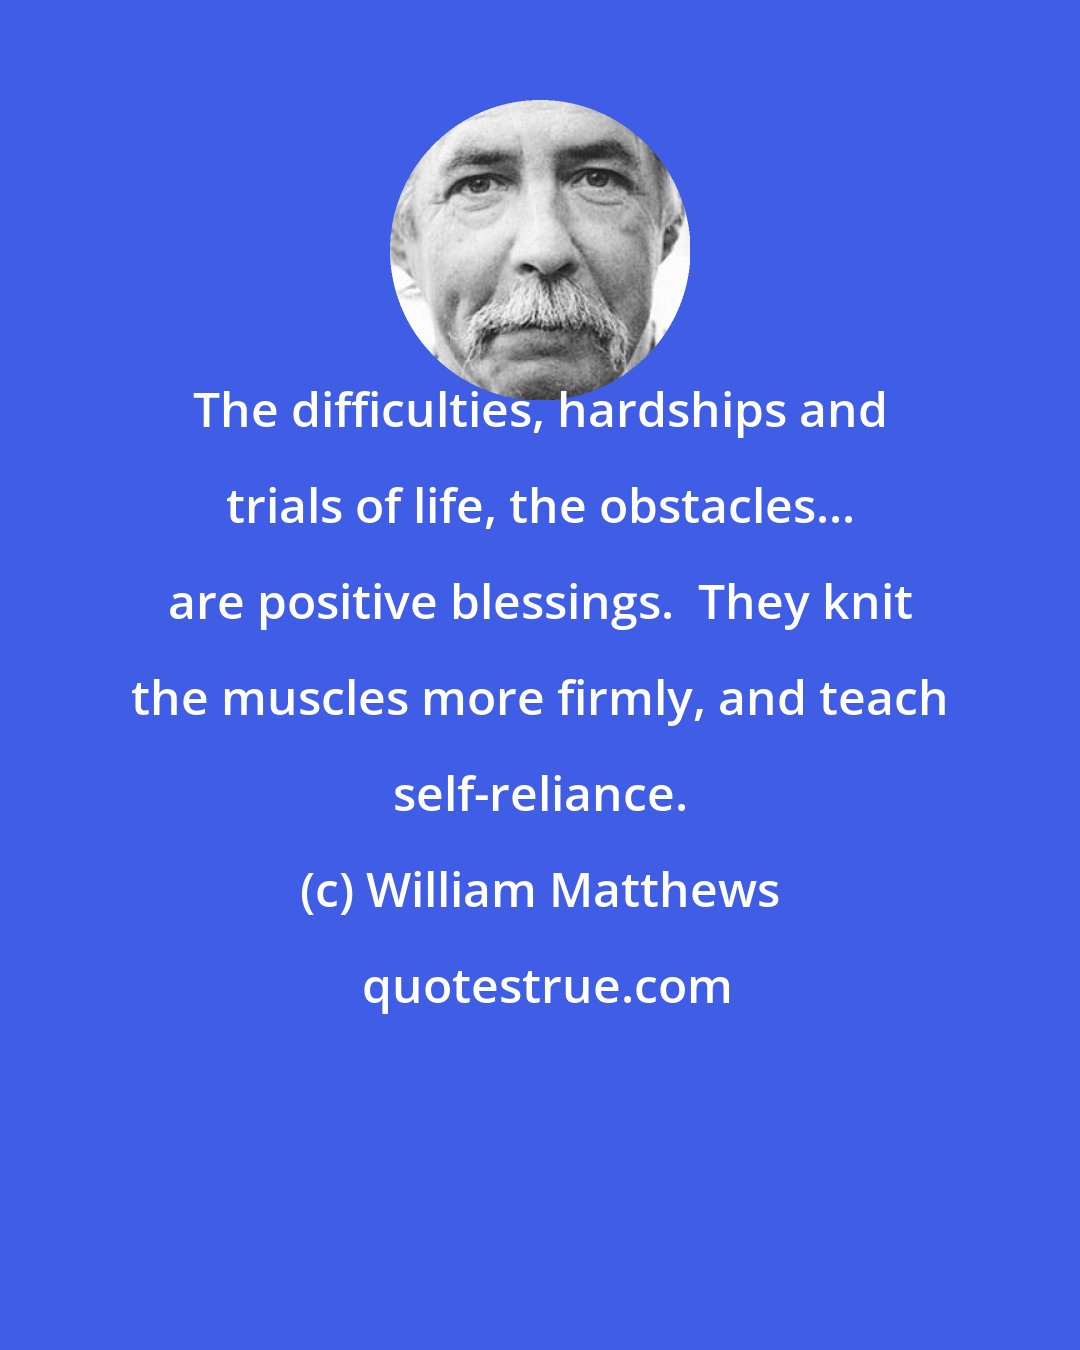 William Matthews: The difficulties, hardships and trials of life, the obstacles... are positive blessings.  They knit the muscles more firmly, and teach self-reliance.